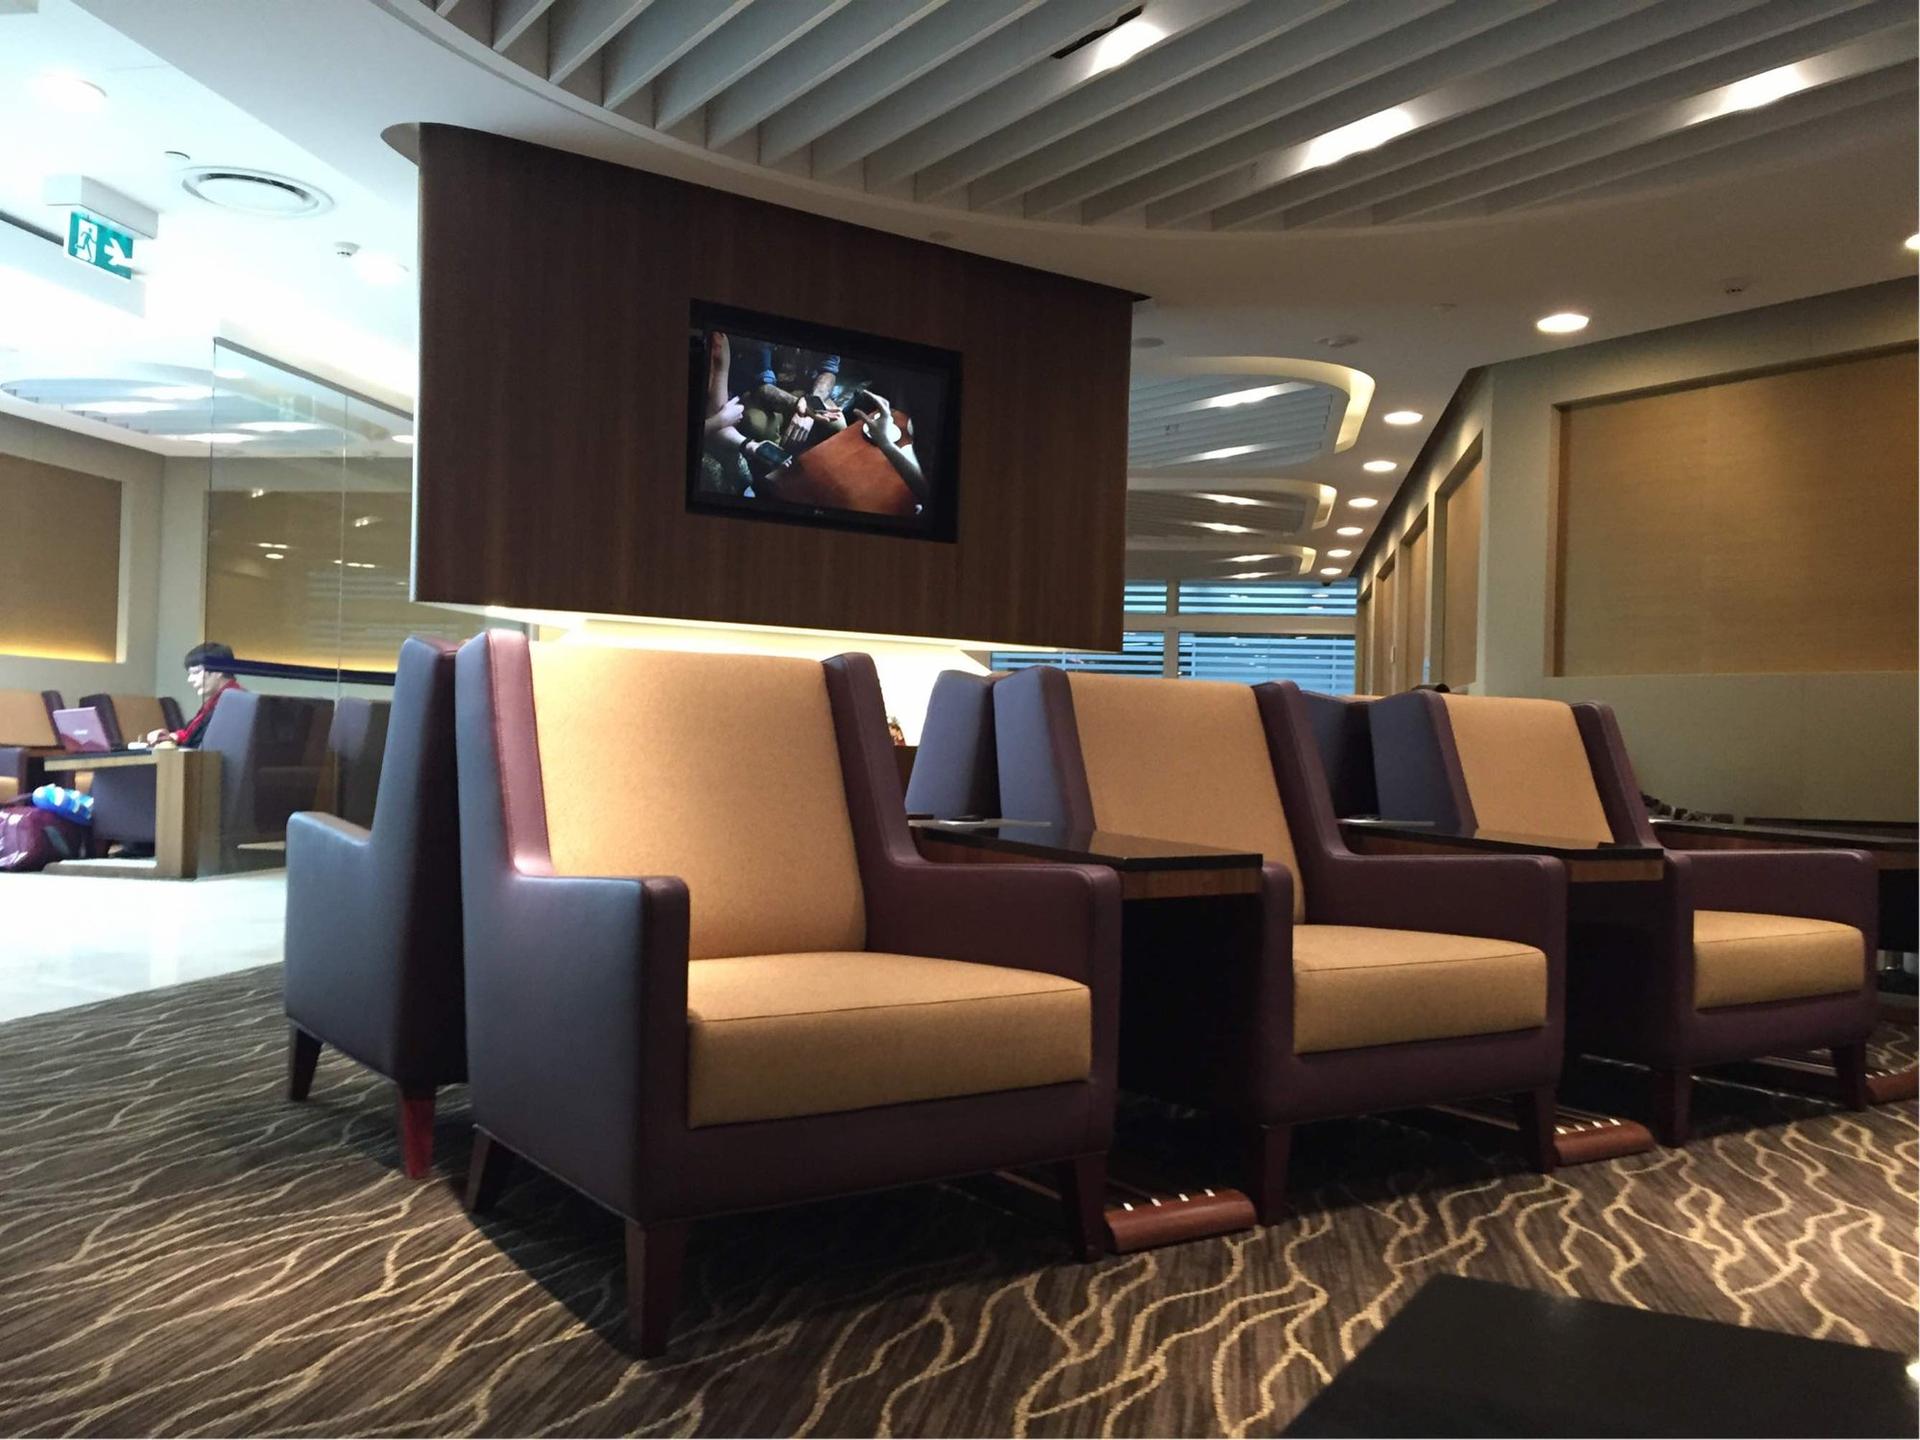 Singapore Airlines SilverKris Business Class Lounge image 5 of 7